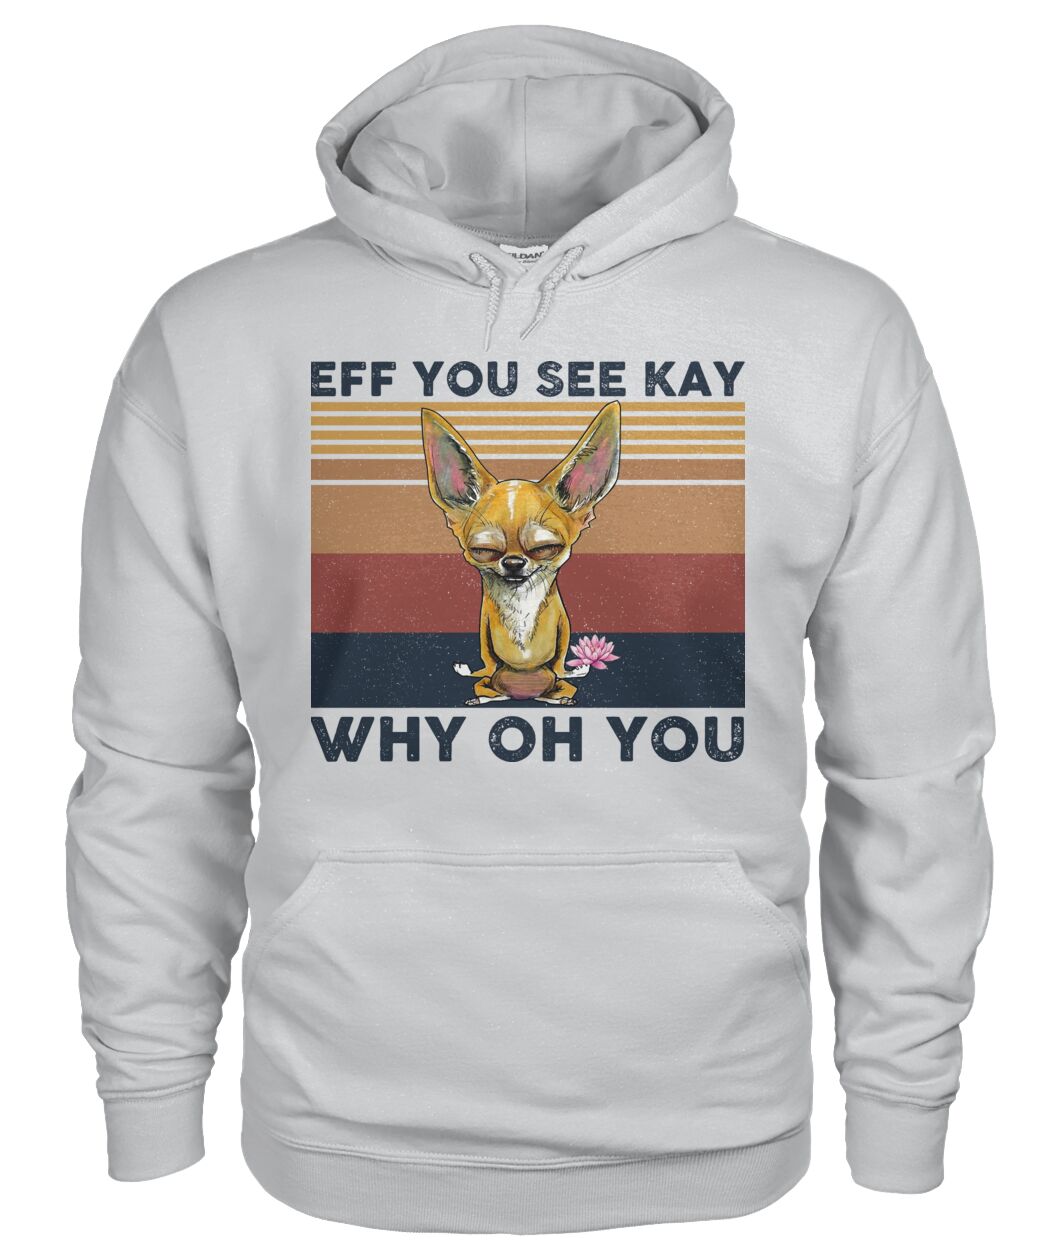 Chihuahua Yoga Eff You See Kay Why Oh You 3D Hoodie, Shirt 19